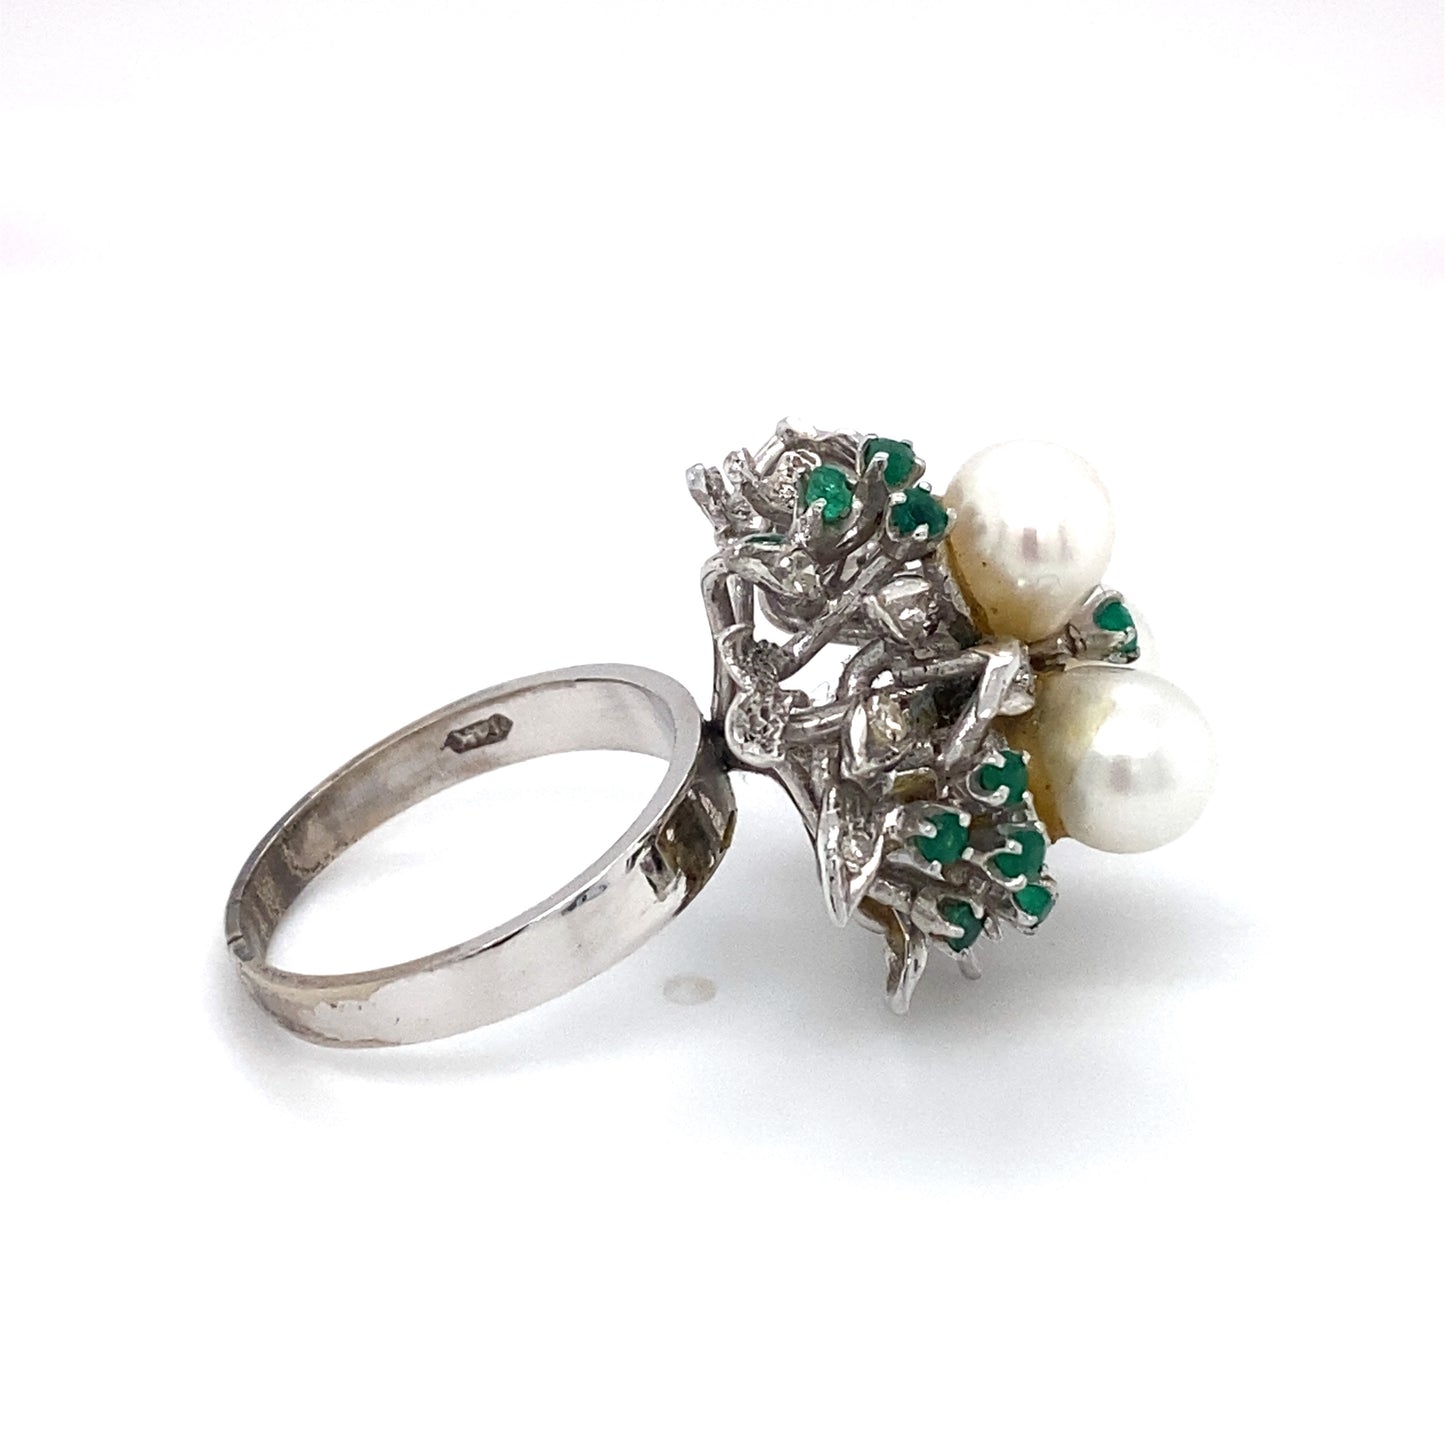 Circa 1960s Set of Earrings and Ring with Pearls and Emeralds in 14K White Gold